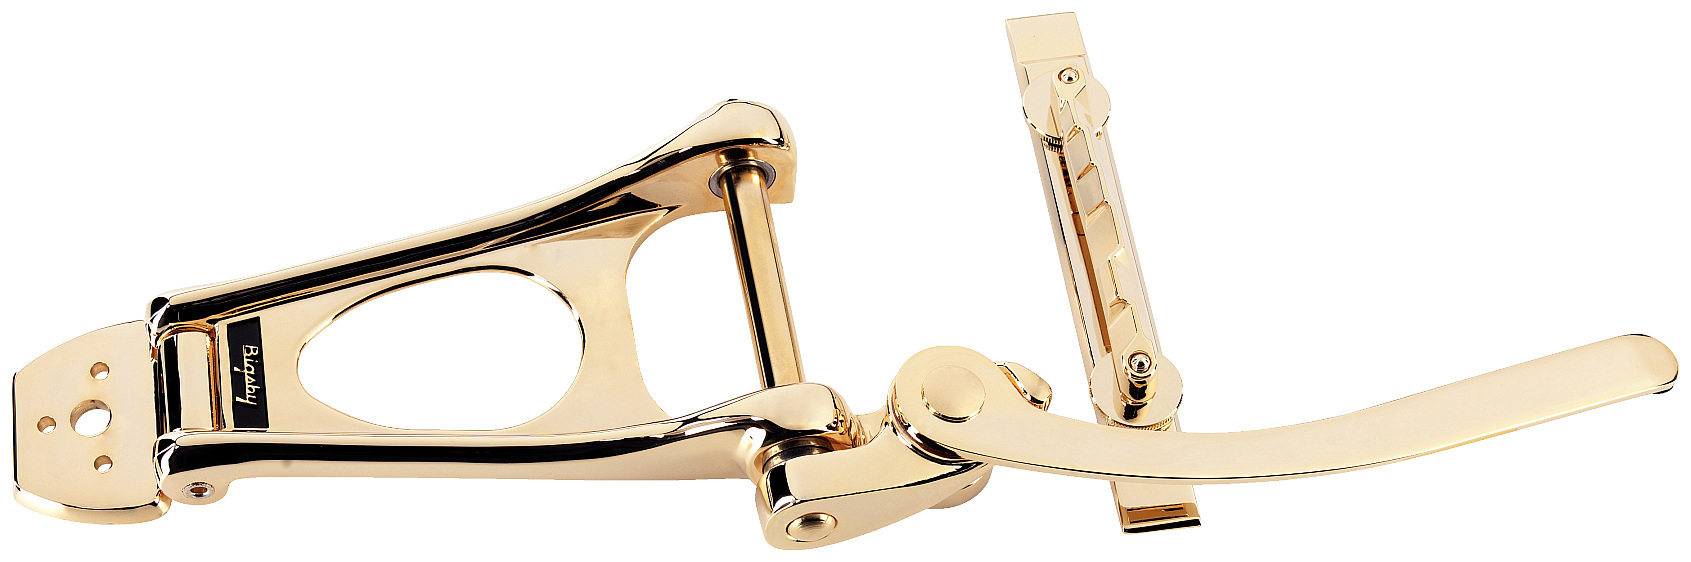 Bigsby B11 Vibrato with Bridge - Thin Electric Hollow-Body and Semi-Hollow Guitars - Gold